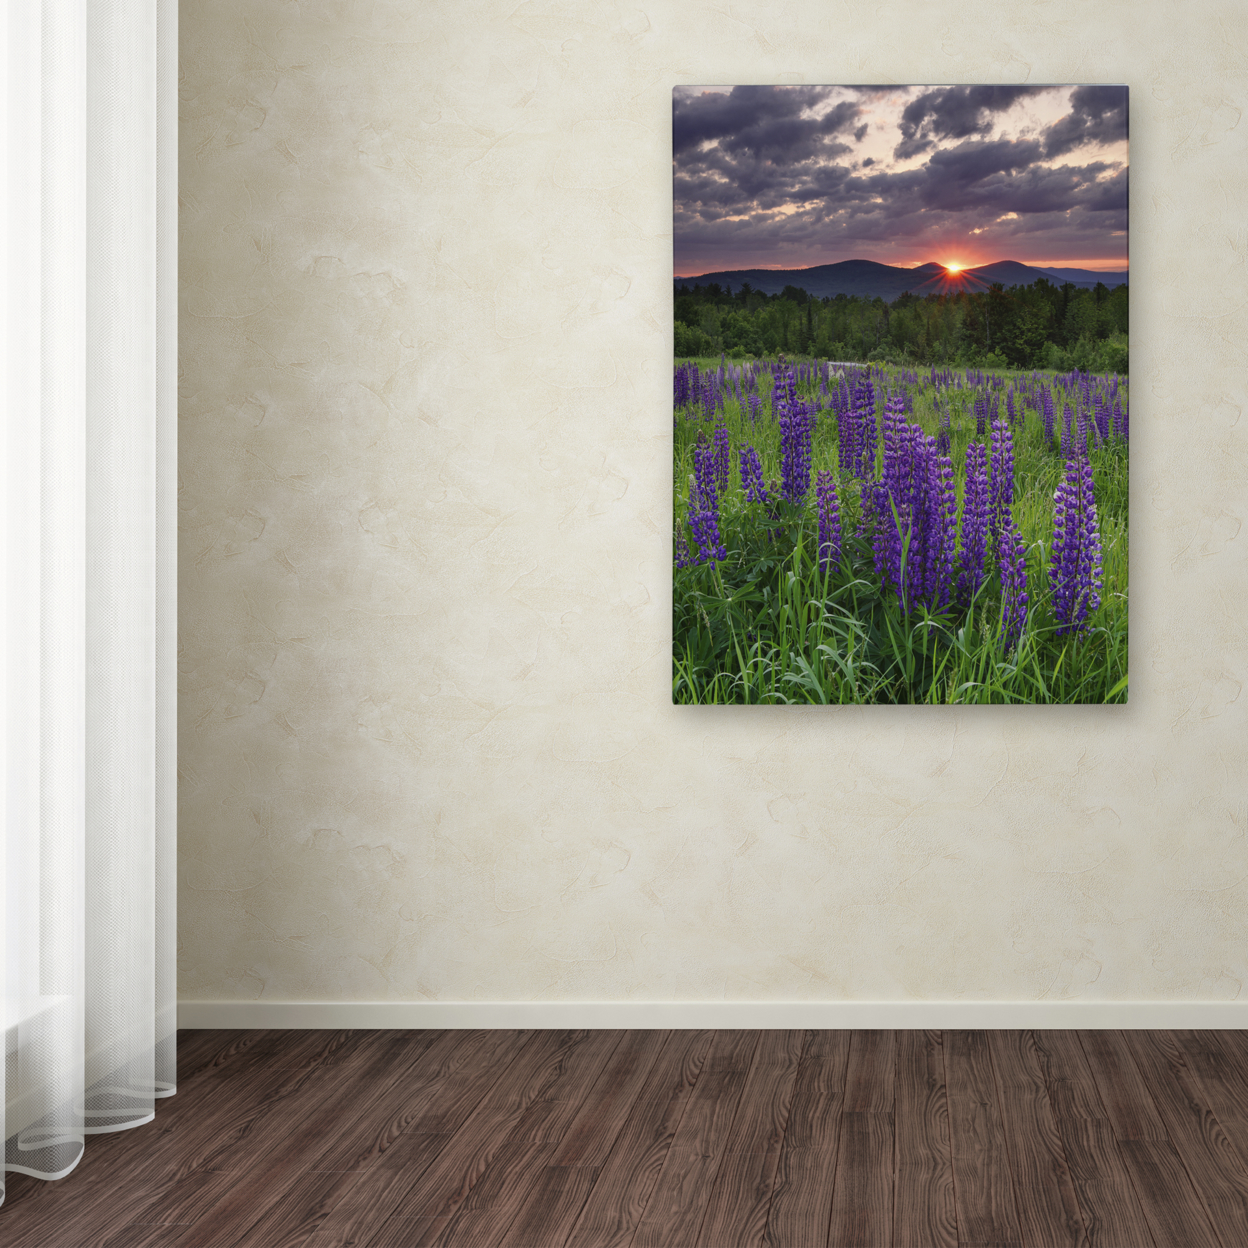 Michael Blanchette Photography 'Moody Sunrise' Canvas Wall Art 35 X 47 Inches